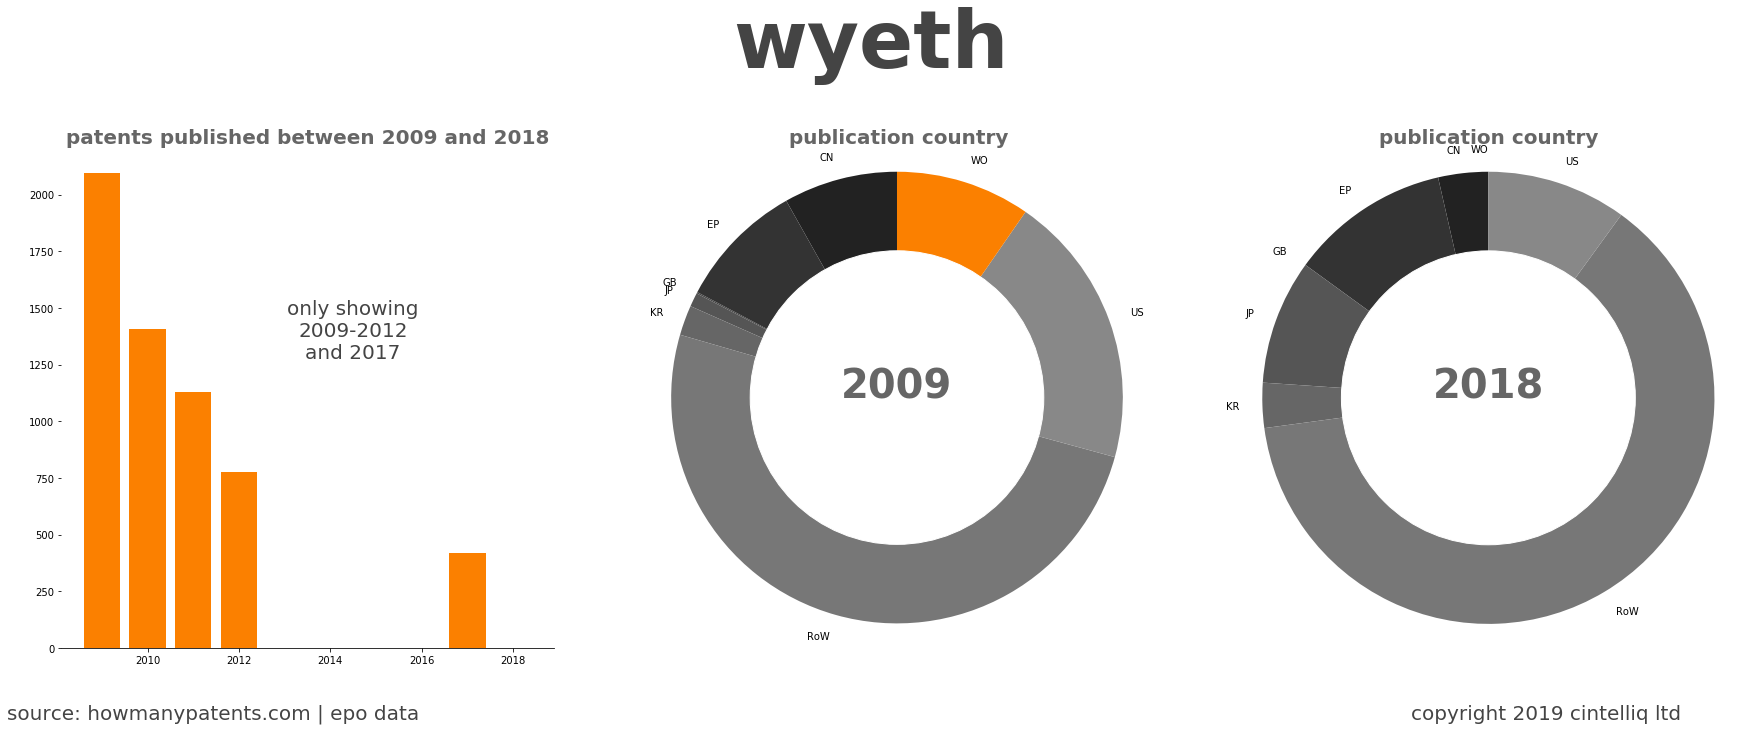 summary of patents for Wyeth